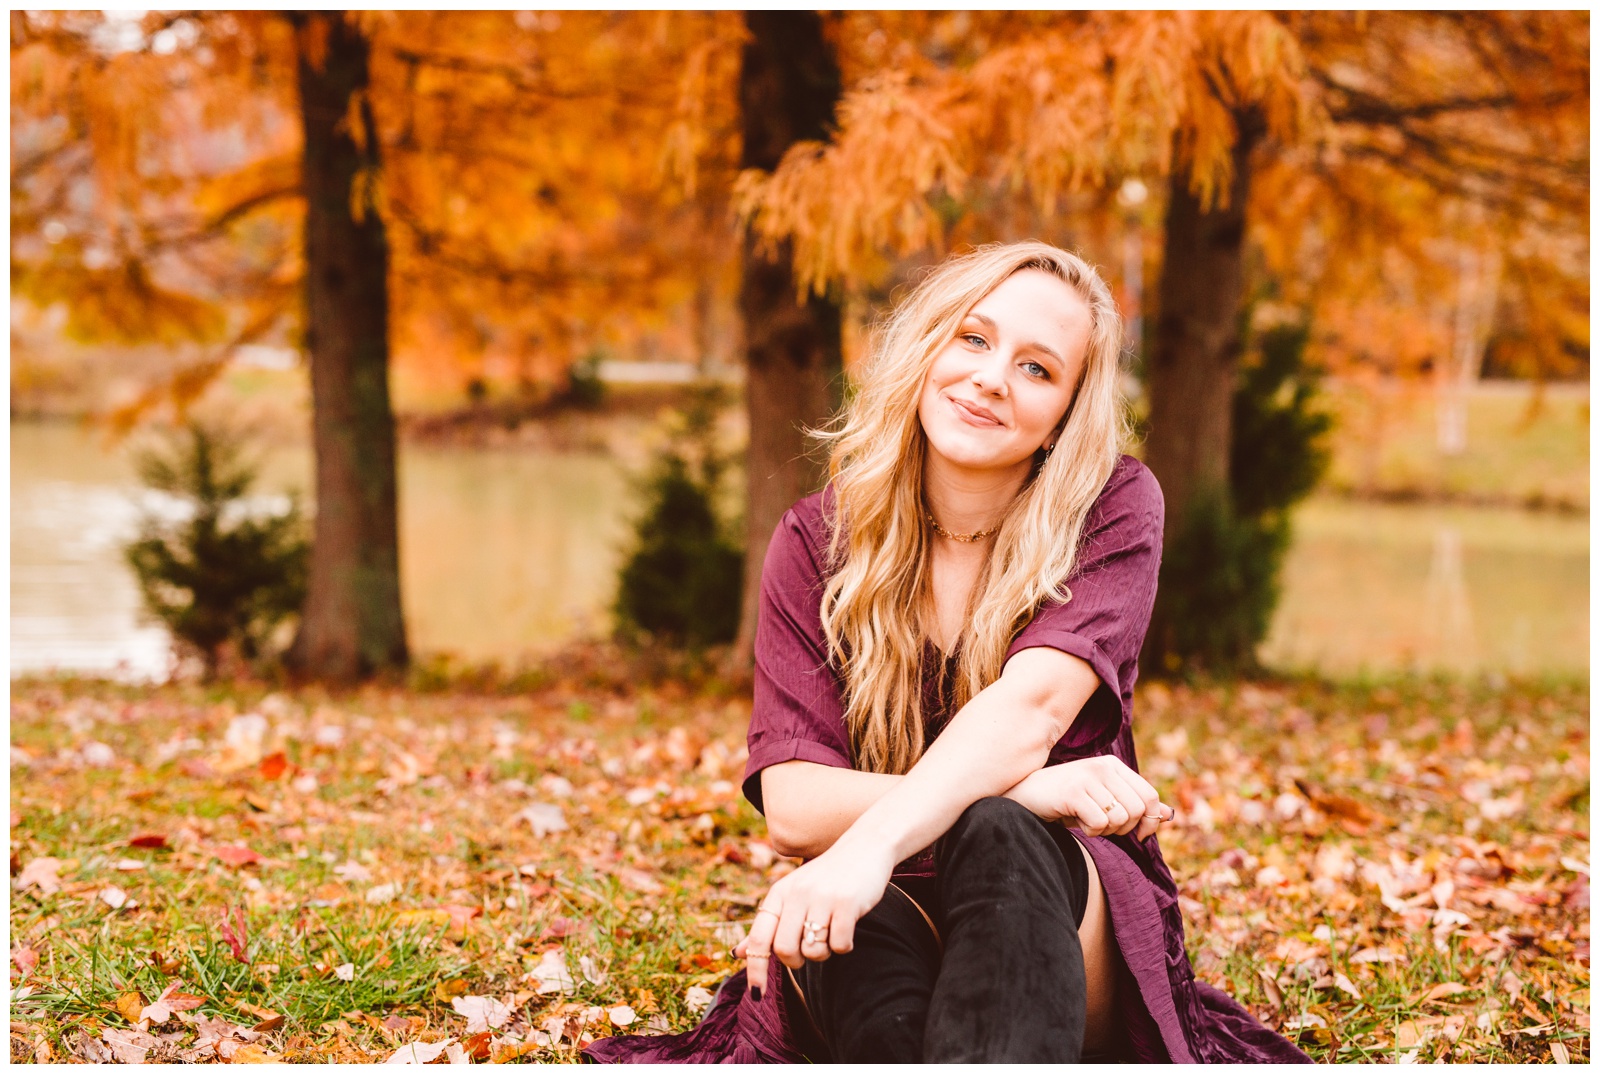 Warm and Vibrant Fall Senior Session Inspiration -Annapolis Maryland - Brooke Michelle Photography